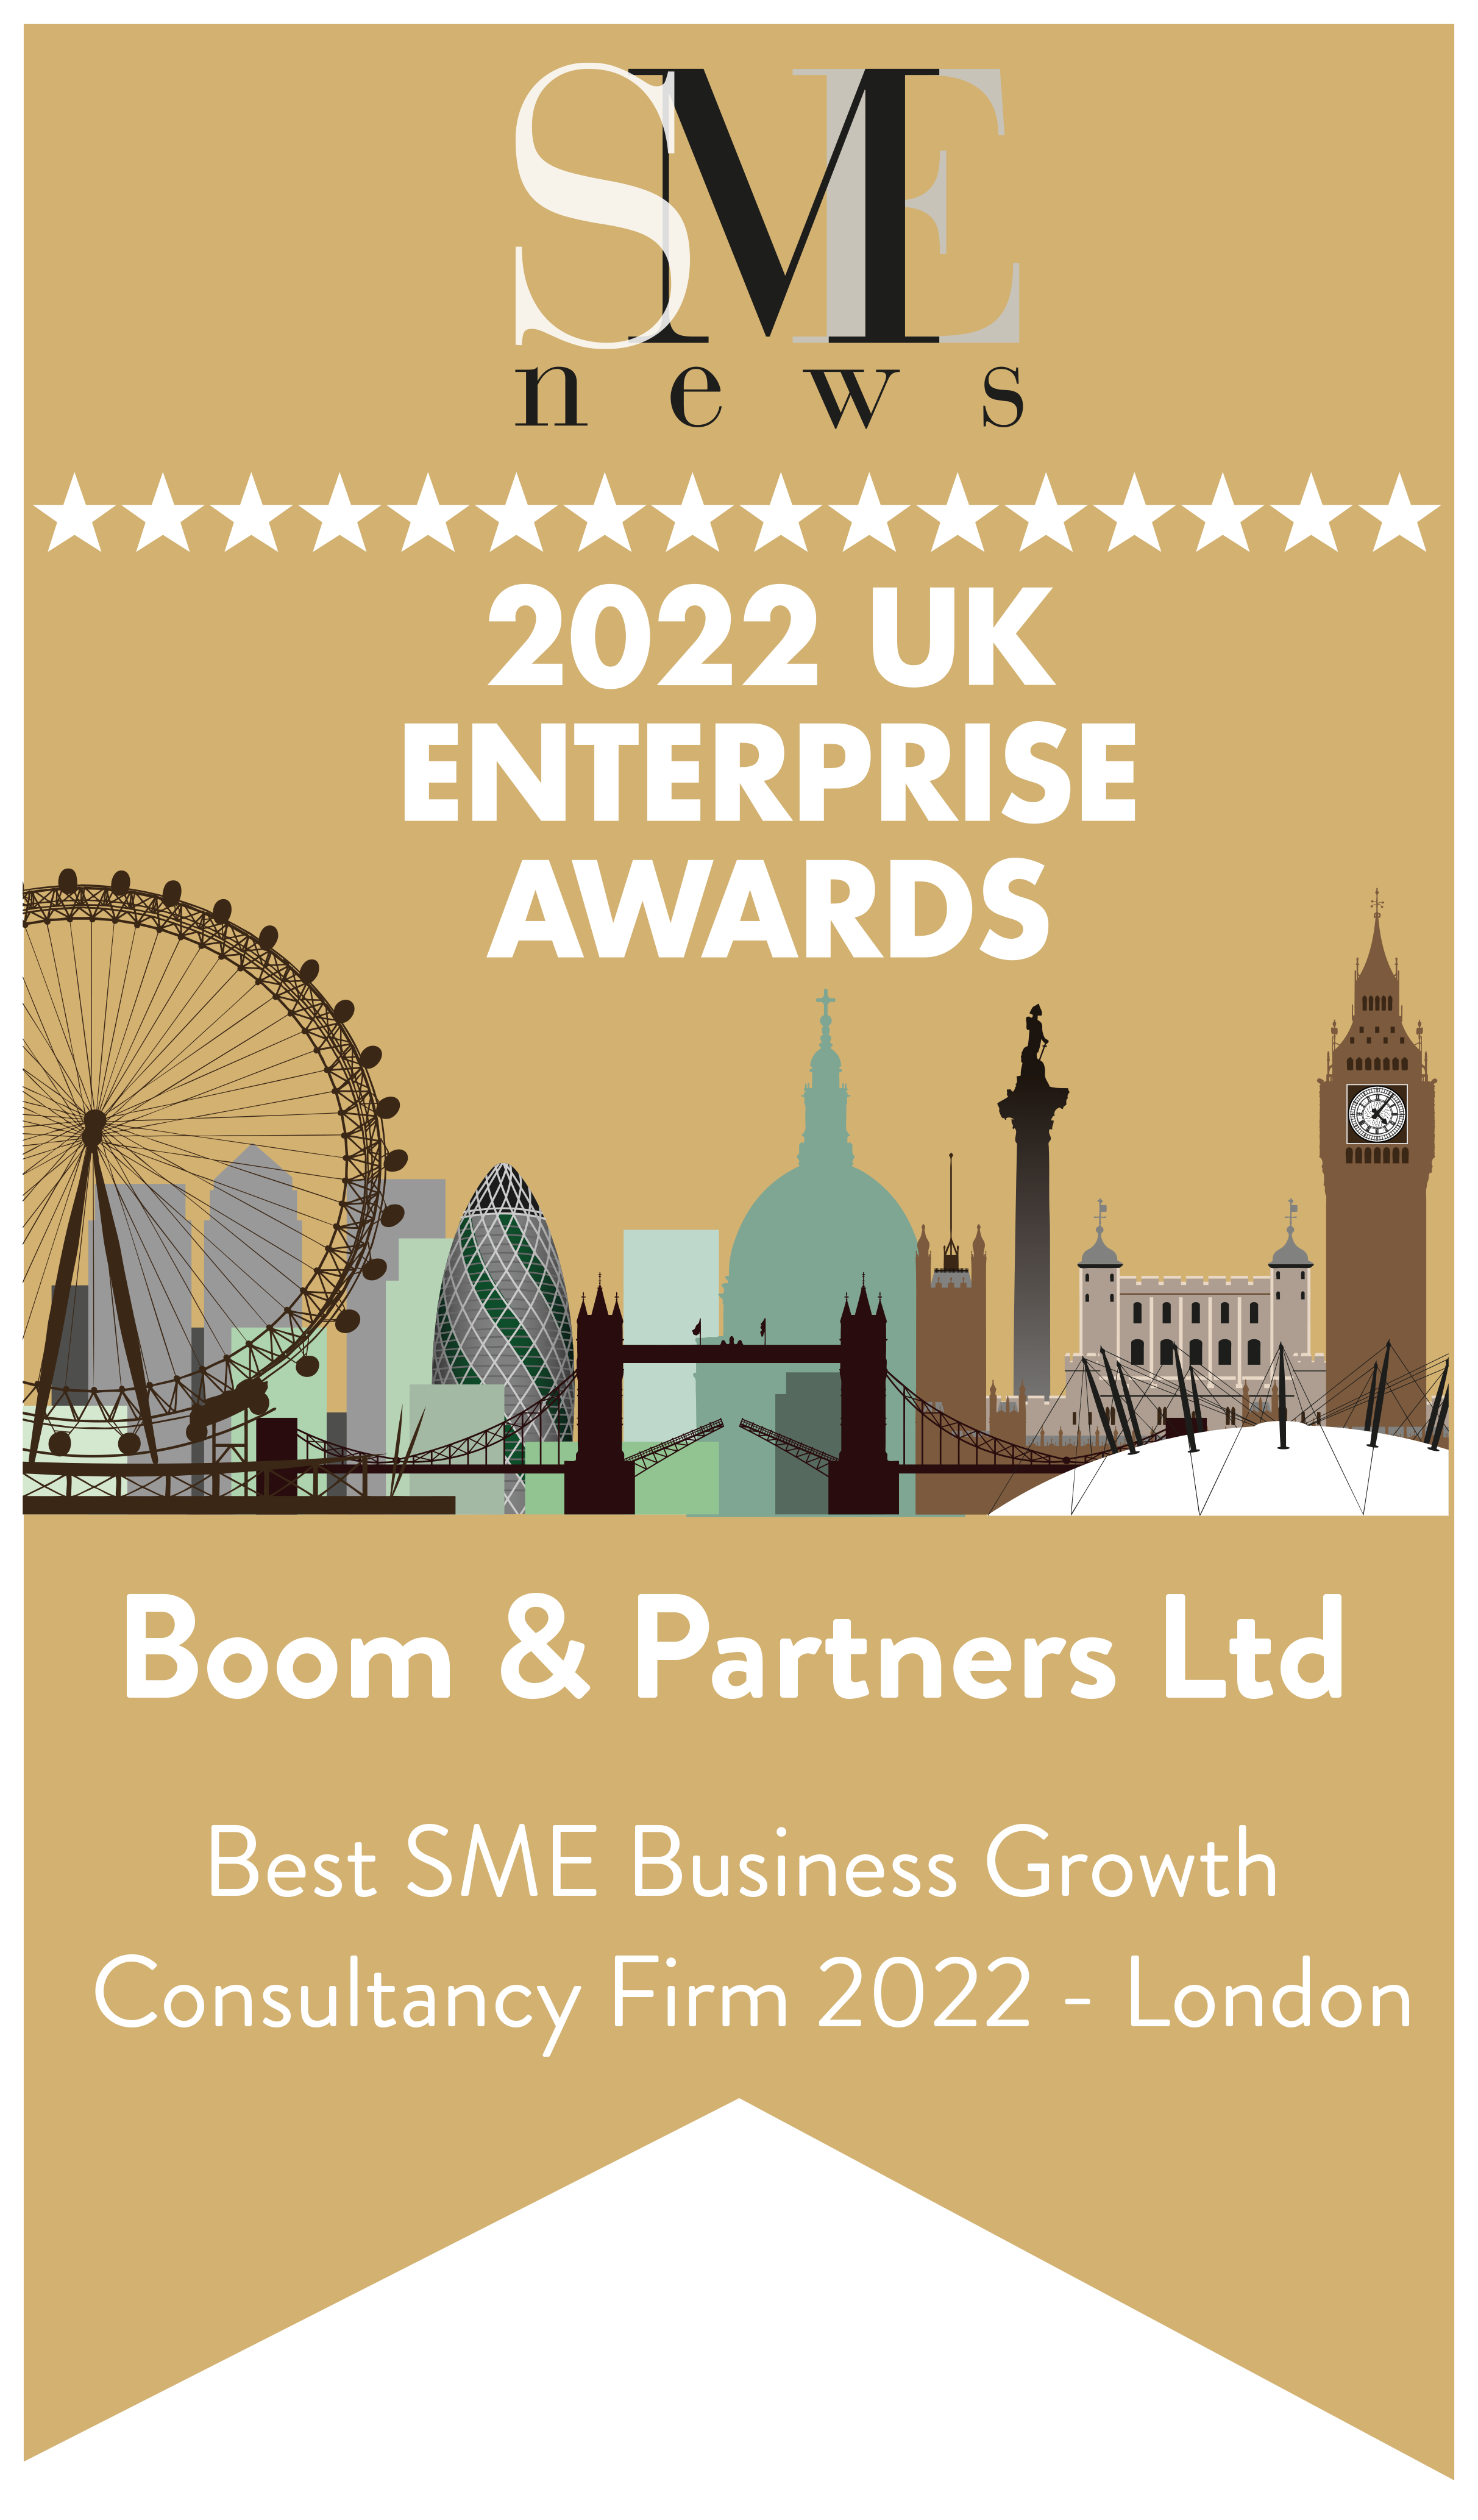 BOOM & Partners wins Best SME Business Growth Consultancy Firm award for the second time!